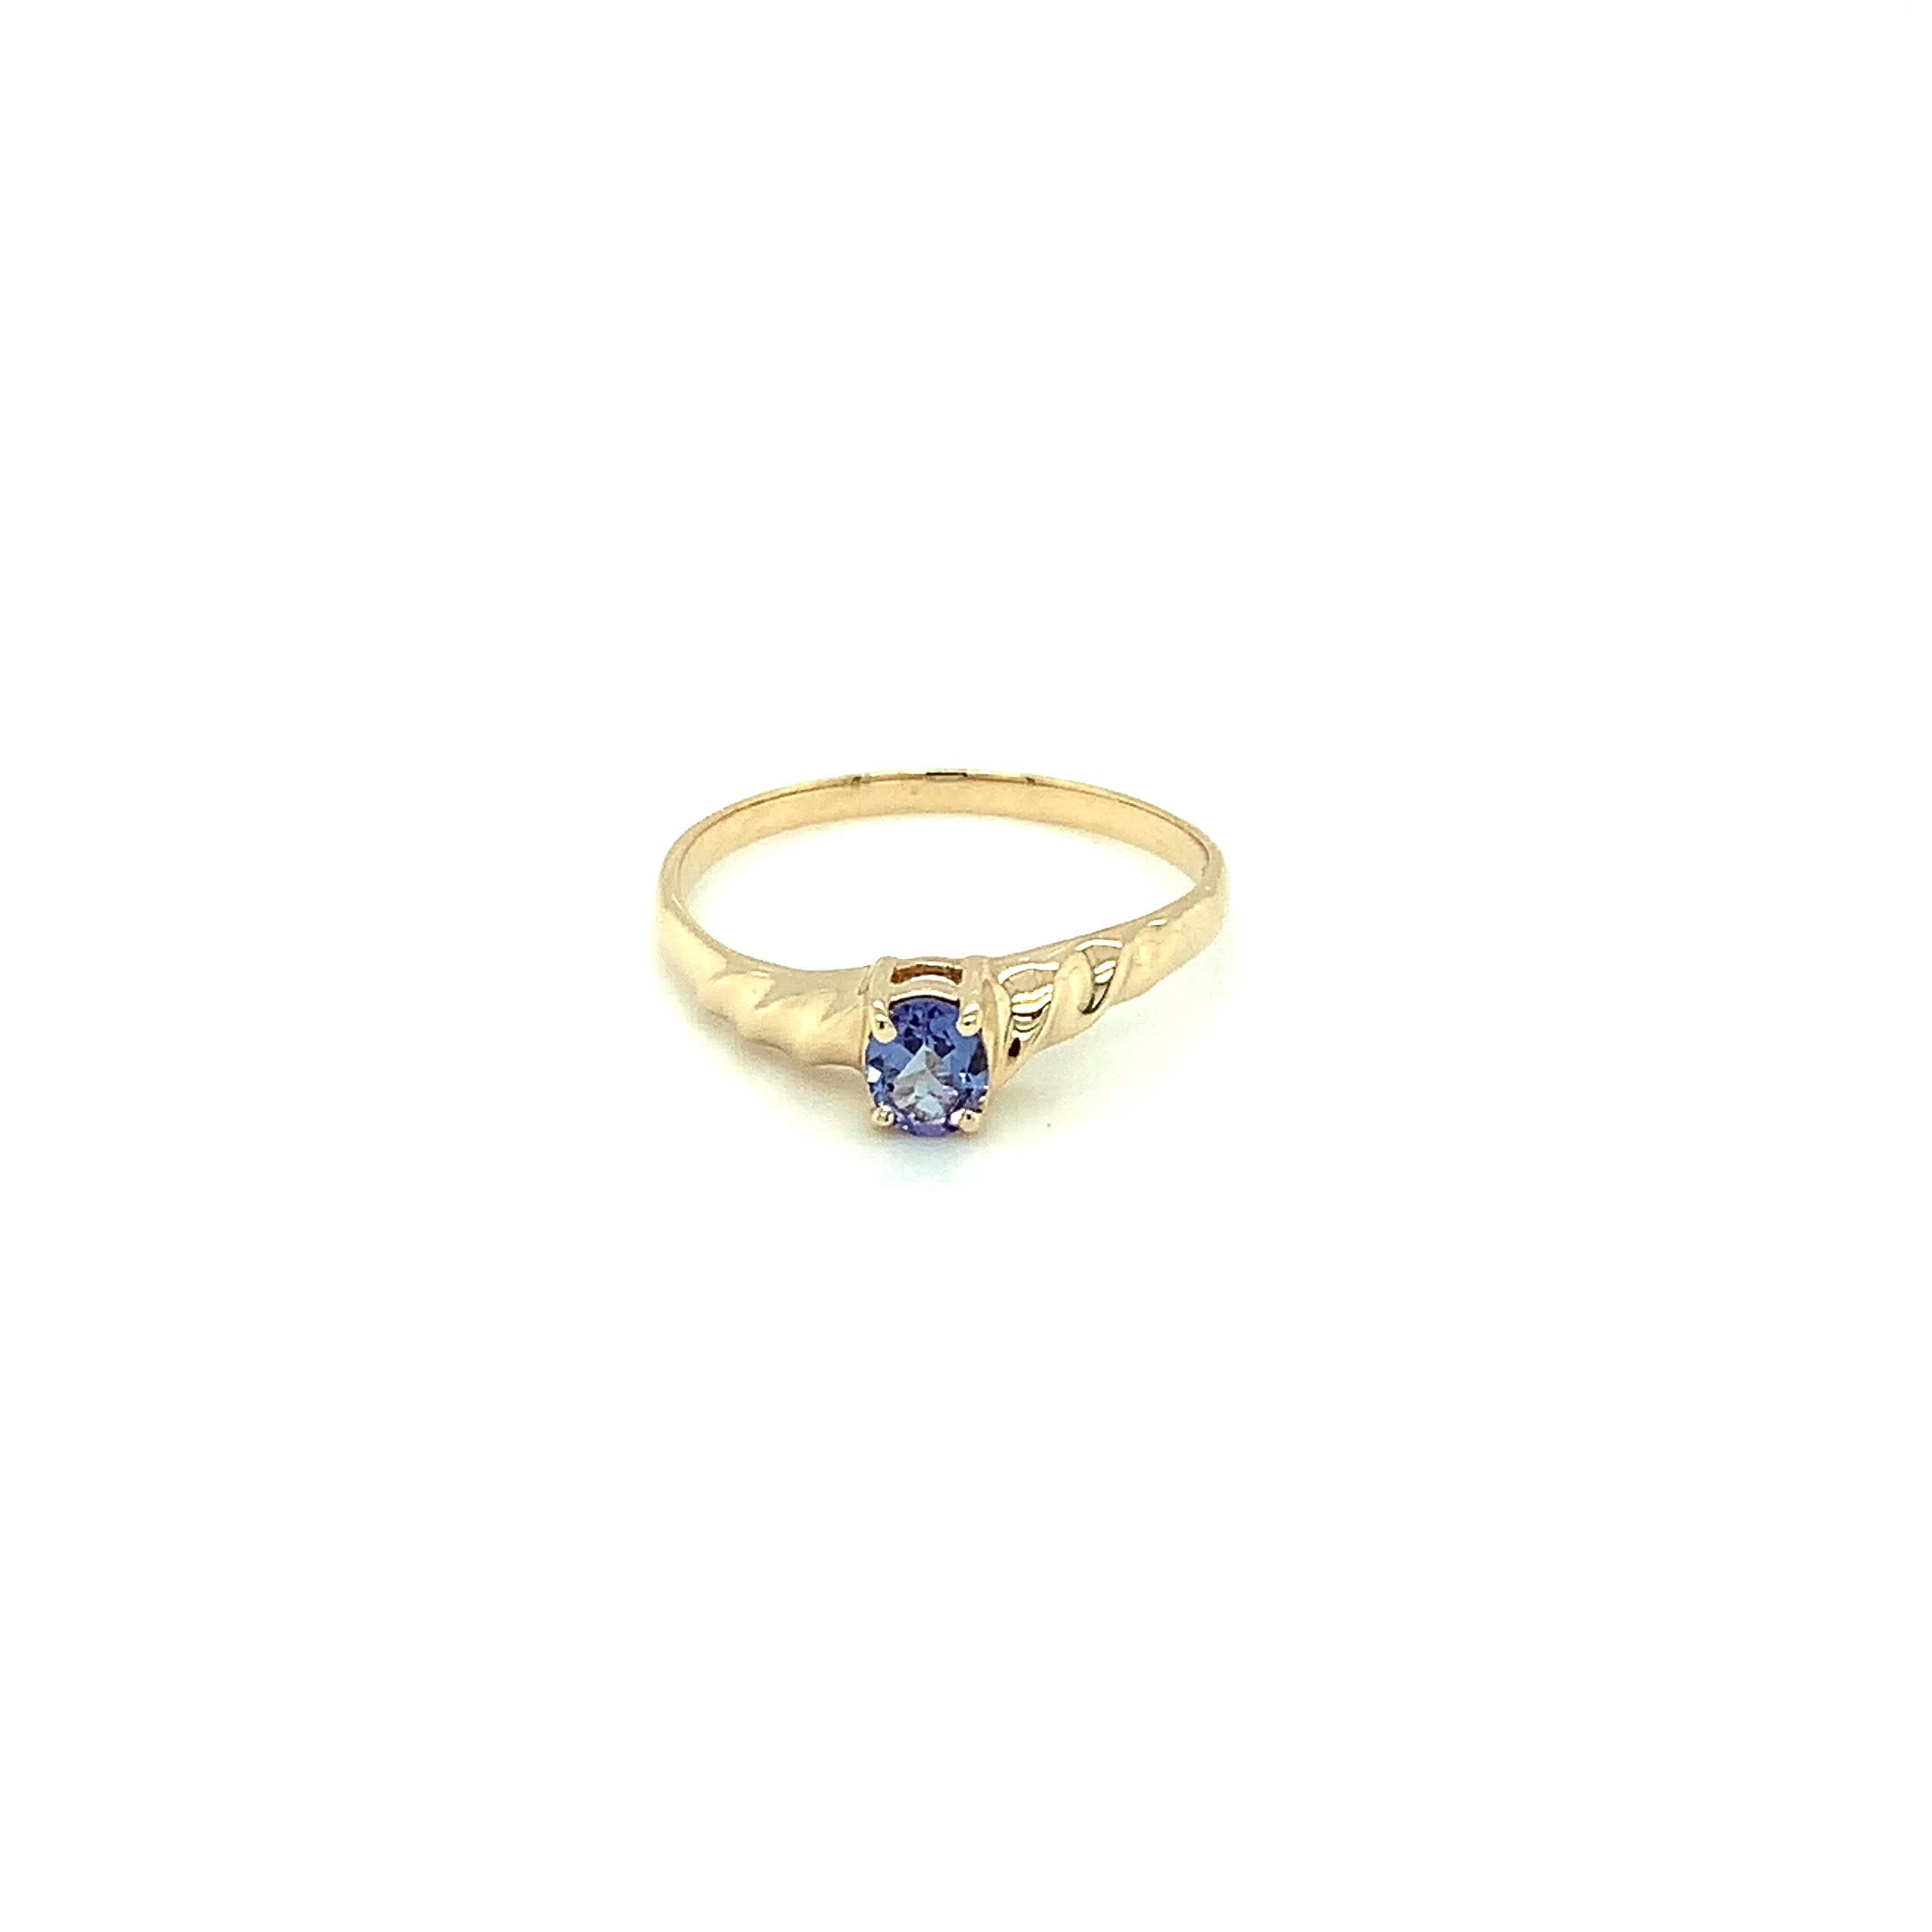 Natural Tanzanite Ring 10K Solid Gold .35ct Solitaire Ring Statement Ring Gemstone Ring Stackable Ring Engagement Ring December Birthstone